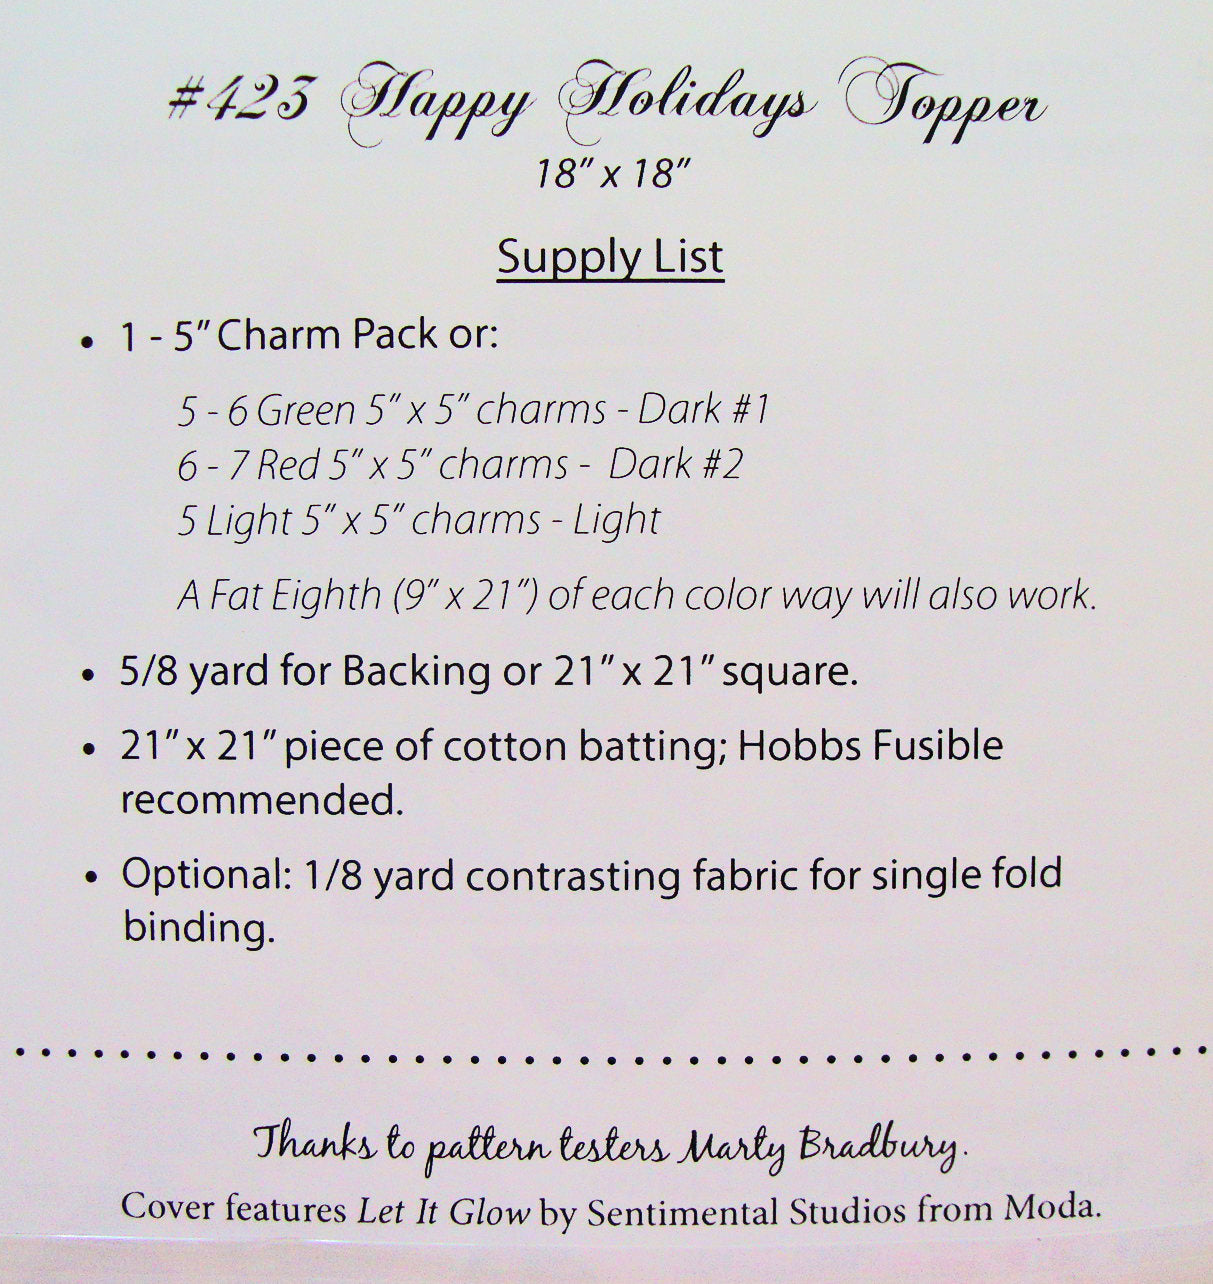 Happy Holidays Table Topper Pattern, Perkins Dry Goods PDG423, Charm Pack Friendly, Star Quilt Table Quilt, Christmas Table Topper